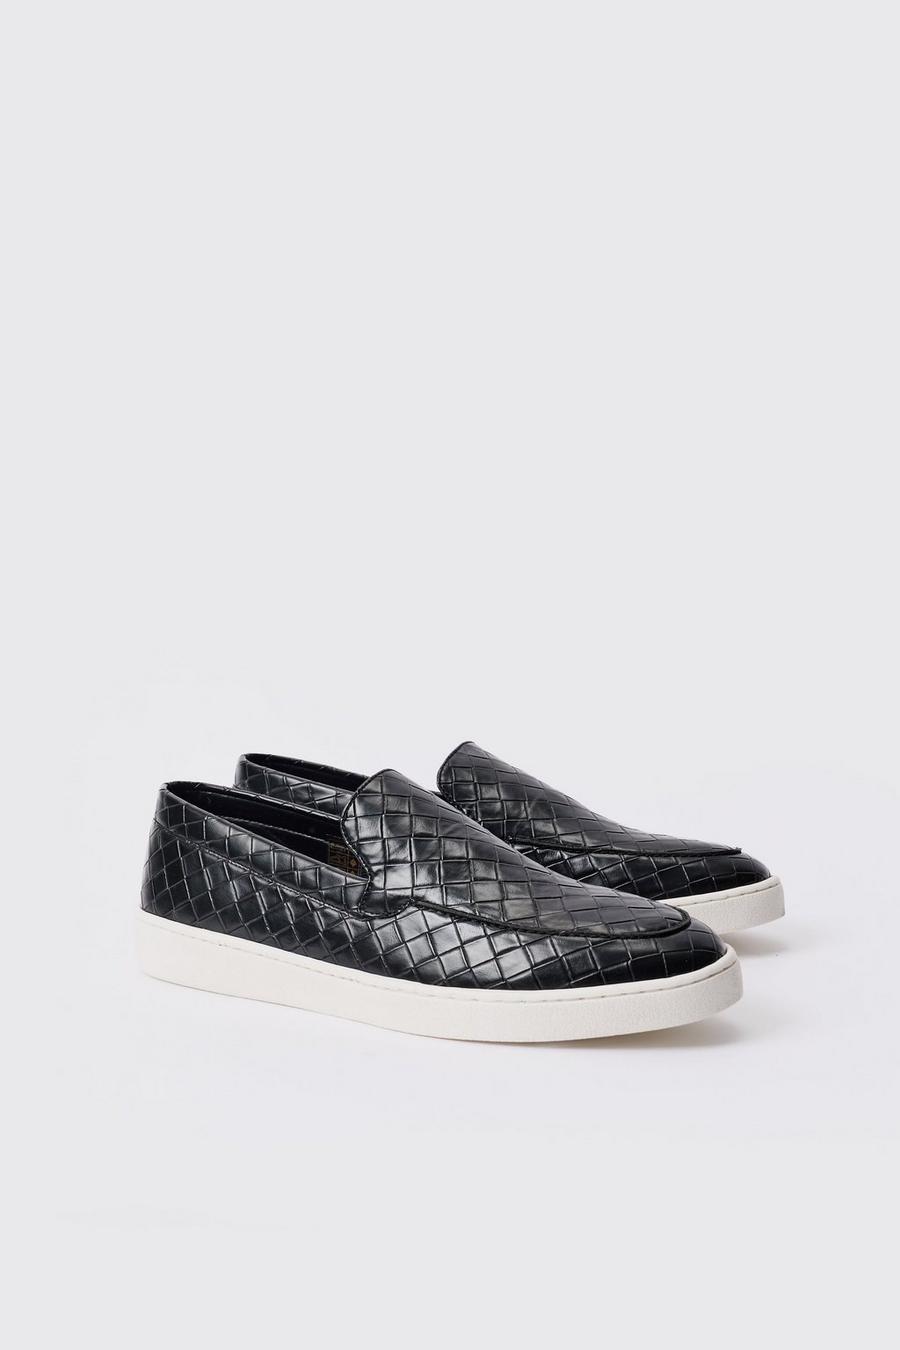 Woven PU Slip On Loafer In Black